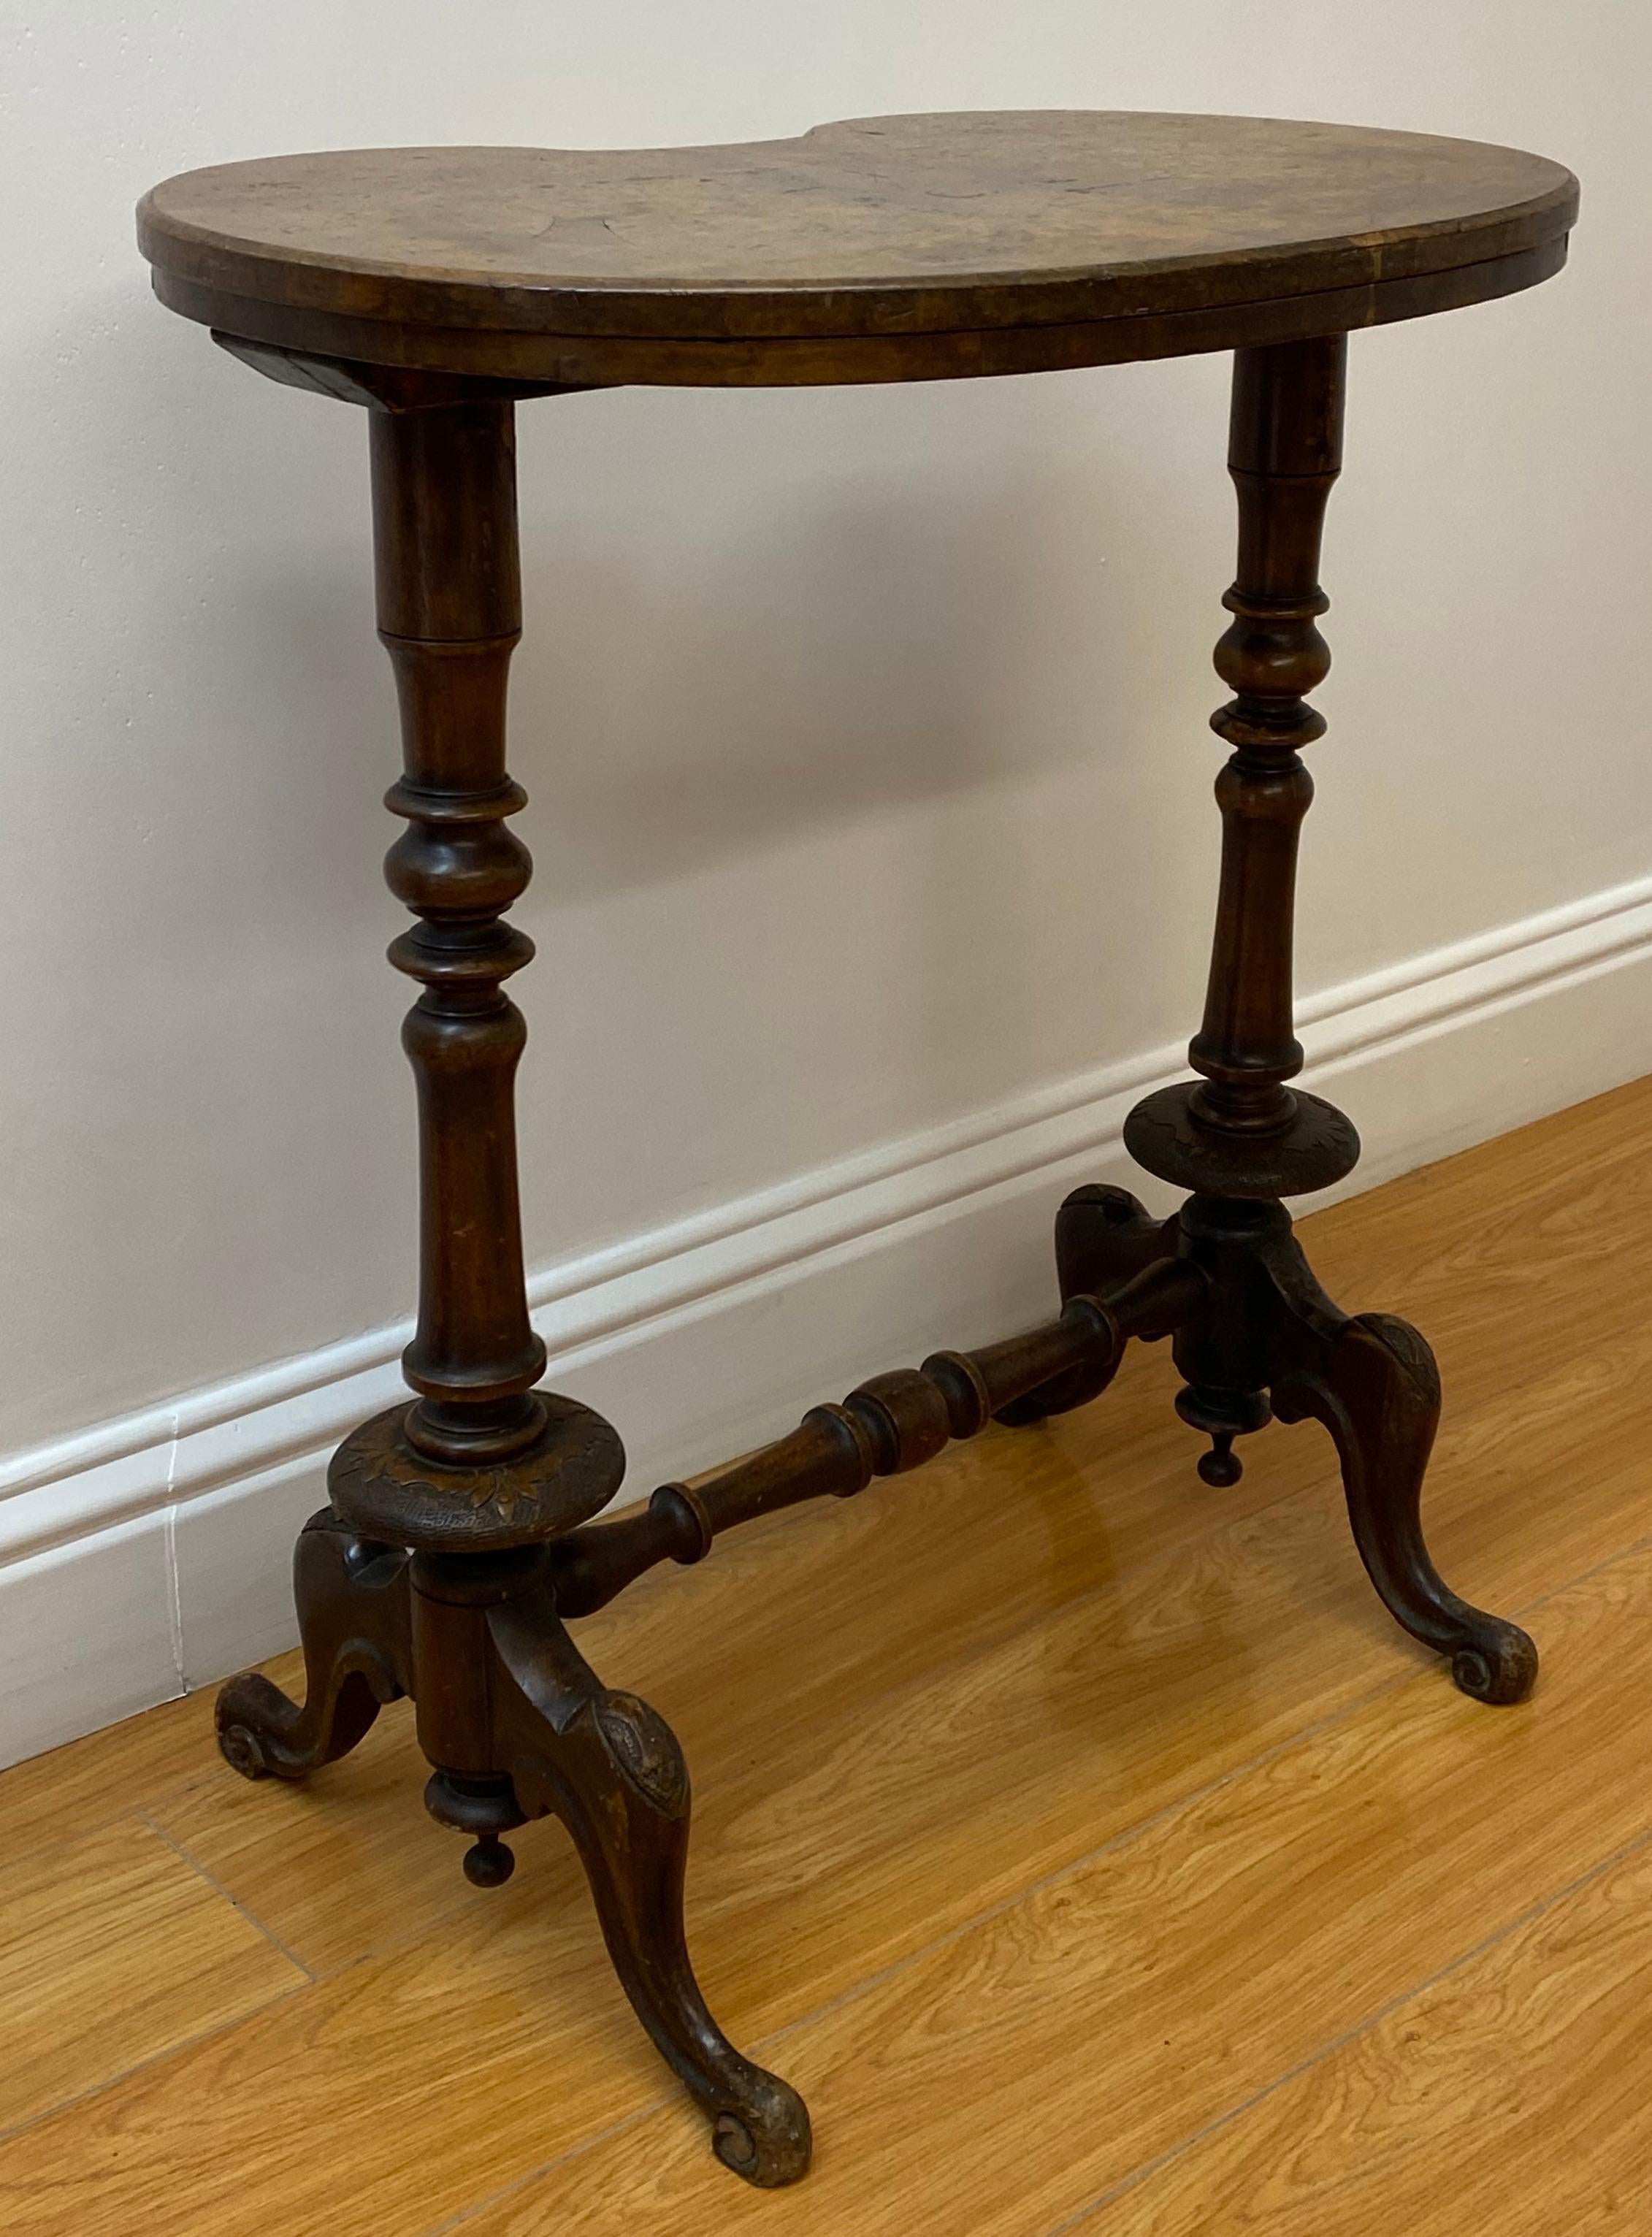 Victorian 19th Century English Walnut Kidney Shaped Side Table, c.1880 For Sale